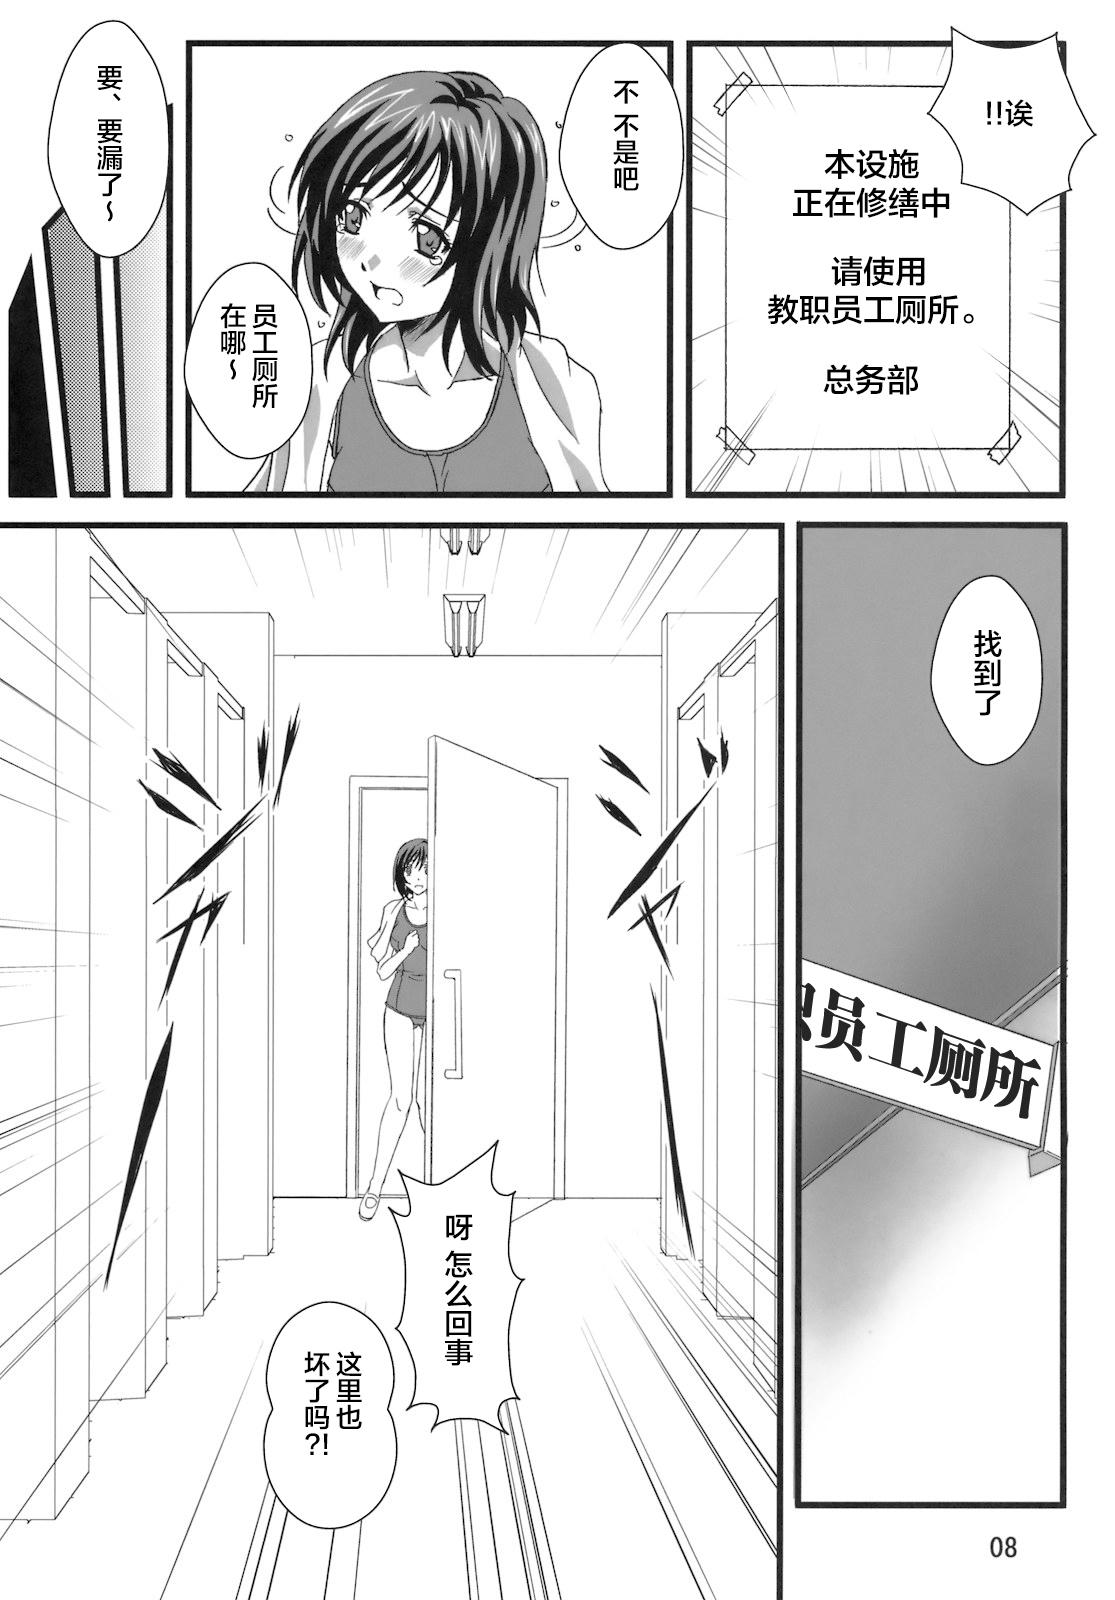 18 Year Old OTOHIME TRAP-01 - Original  - Page 8